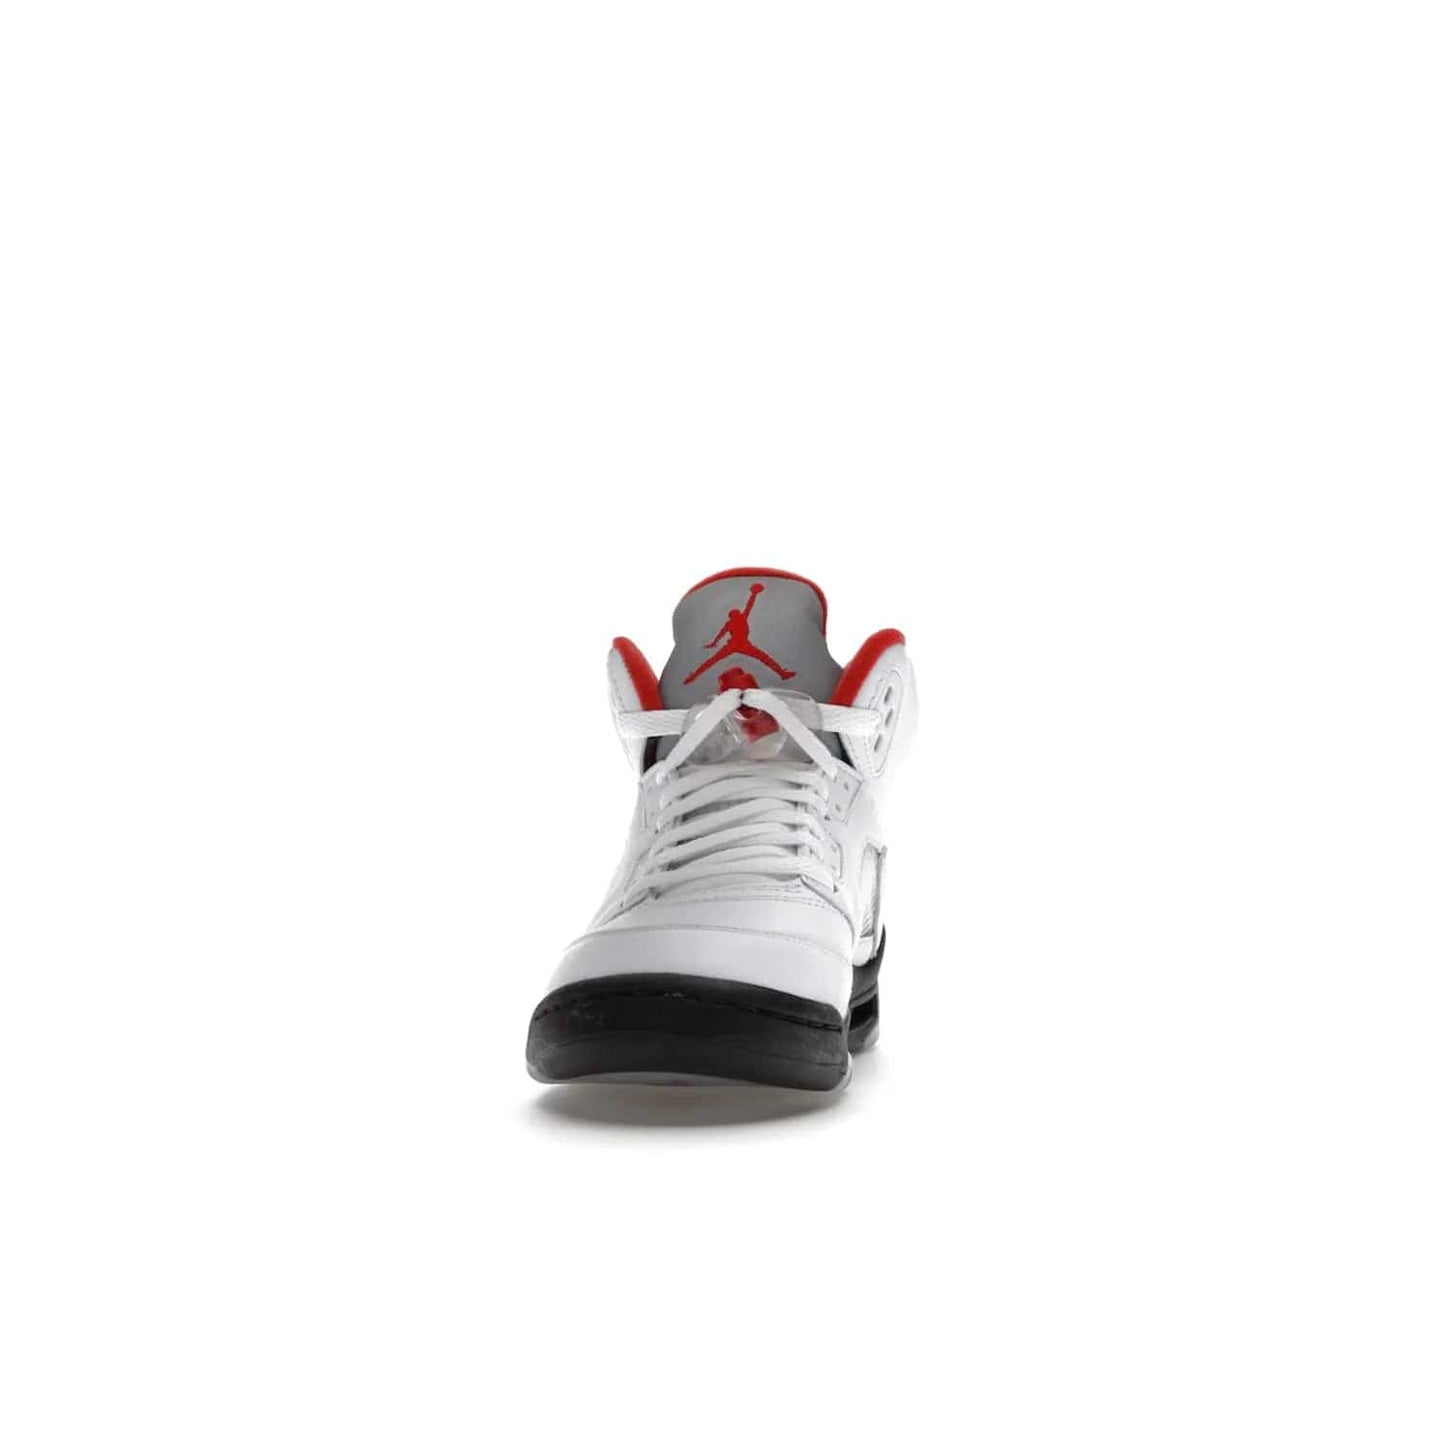 Jordan 5 Retro Fire Red Silver Tongue (2020) (GS) - Image 11 - Only at www.BallersClubKickz.com - A stylish option for any grade schooler. The Air Jordan 5 Retro Fire Red Silver Tongue 2020 GS features a combination of four hues, premium white leather, a clear mesh mid-upper and a reflective silver tongue. An icy translucent blue outsole completes the look. Available on May 2, $150.